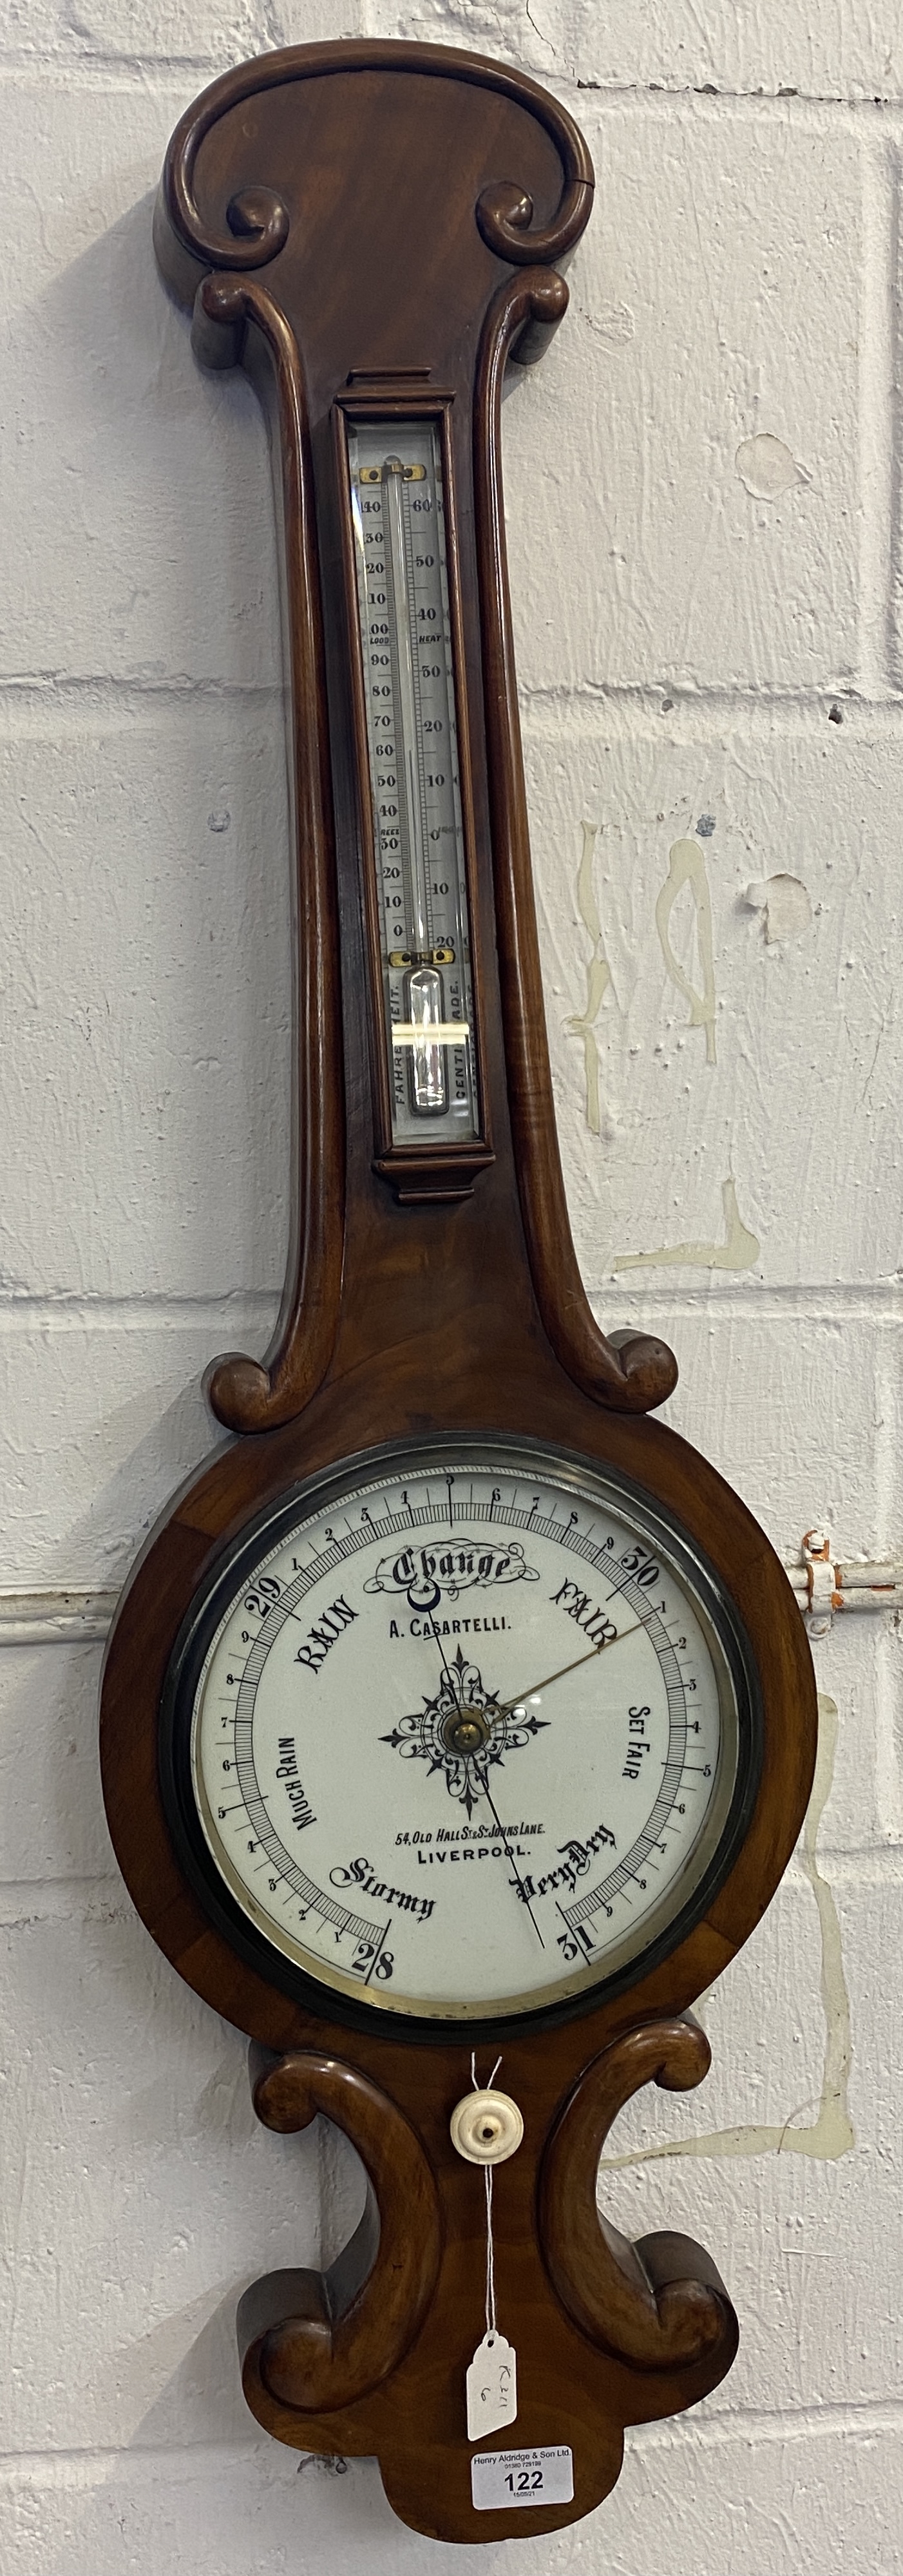 Early 20th cent. Mahogany banjo style barometer, white enamel dial with thermometer above. A.